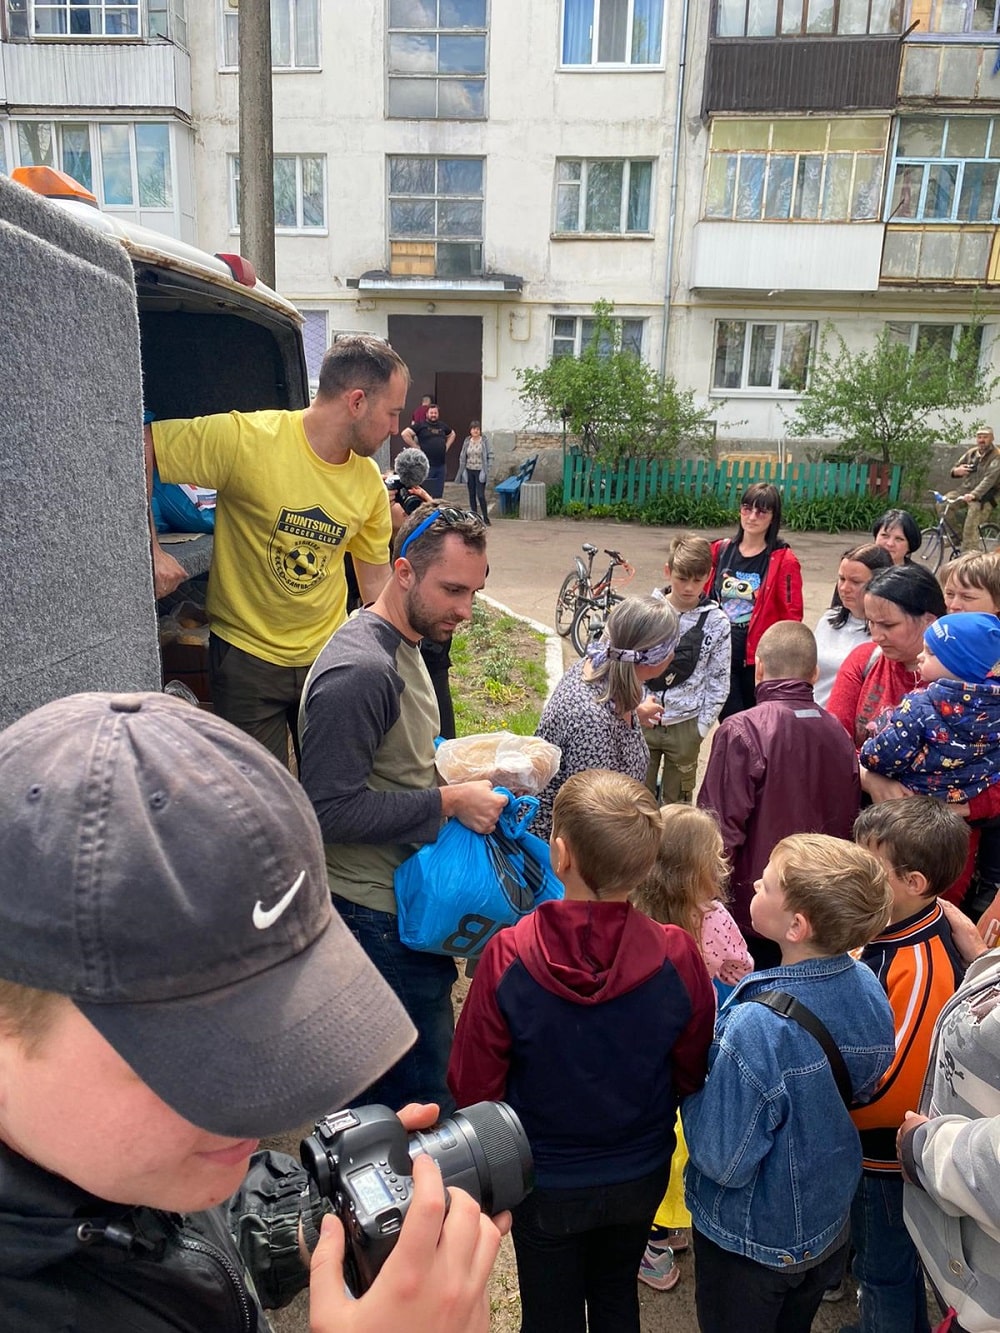 Michael passing out food and water to Ukrainians